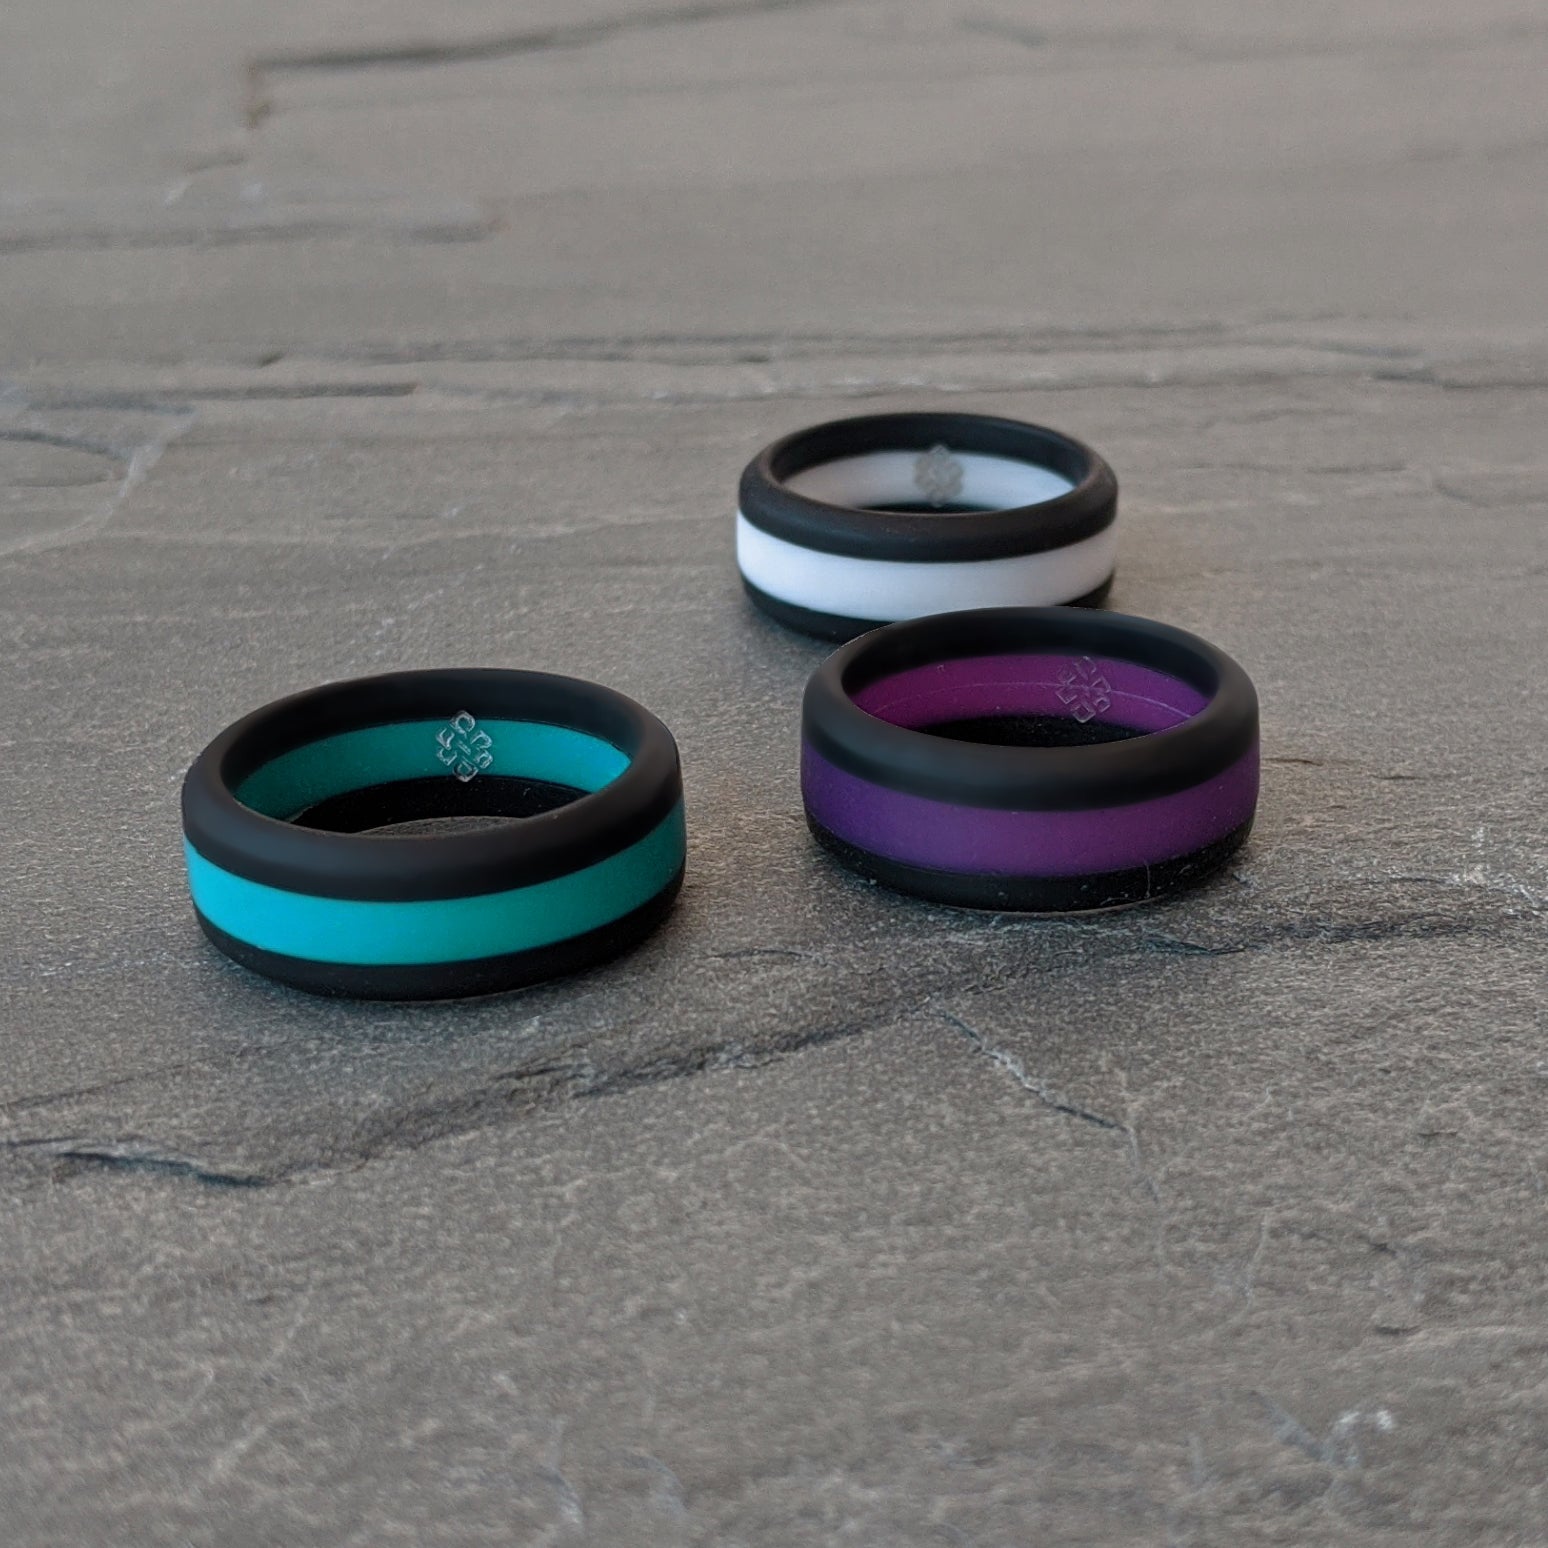 Teal Stripe Silicone Ring for Men and Women - Knot Theory